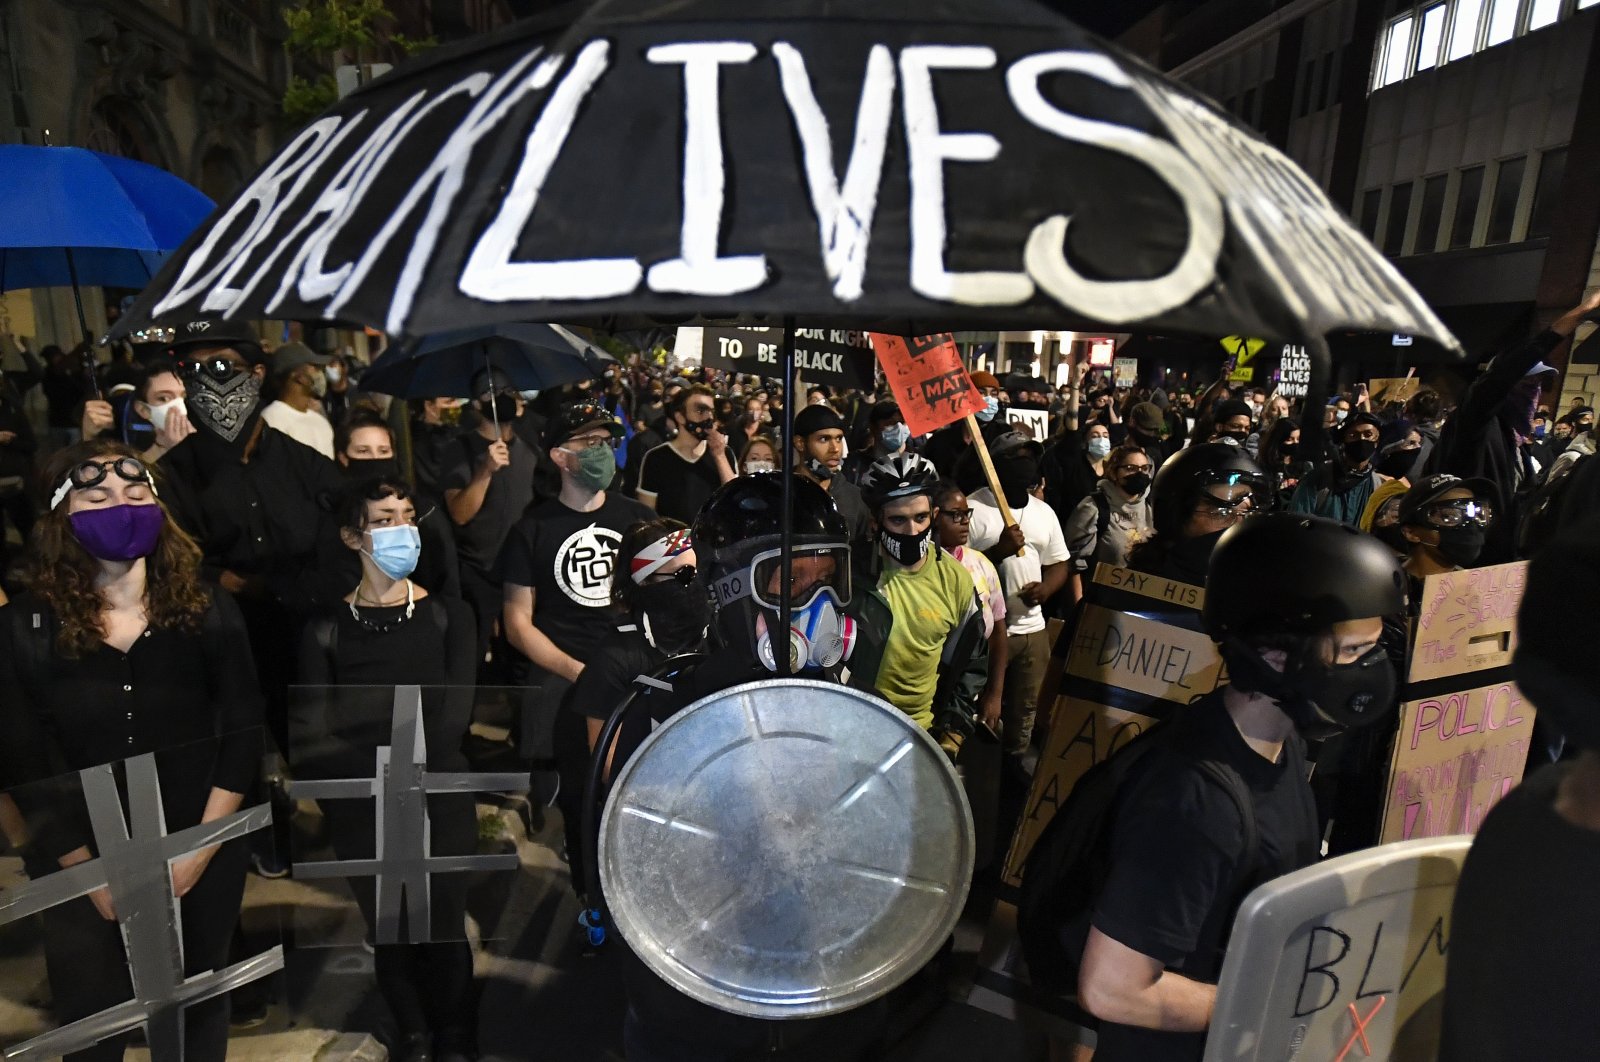 Demonstrators march through the streets protesting the death of Daniel Prude, Rochester, New York, the U.S. Sept. 4, 2020. (AP Photo)